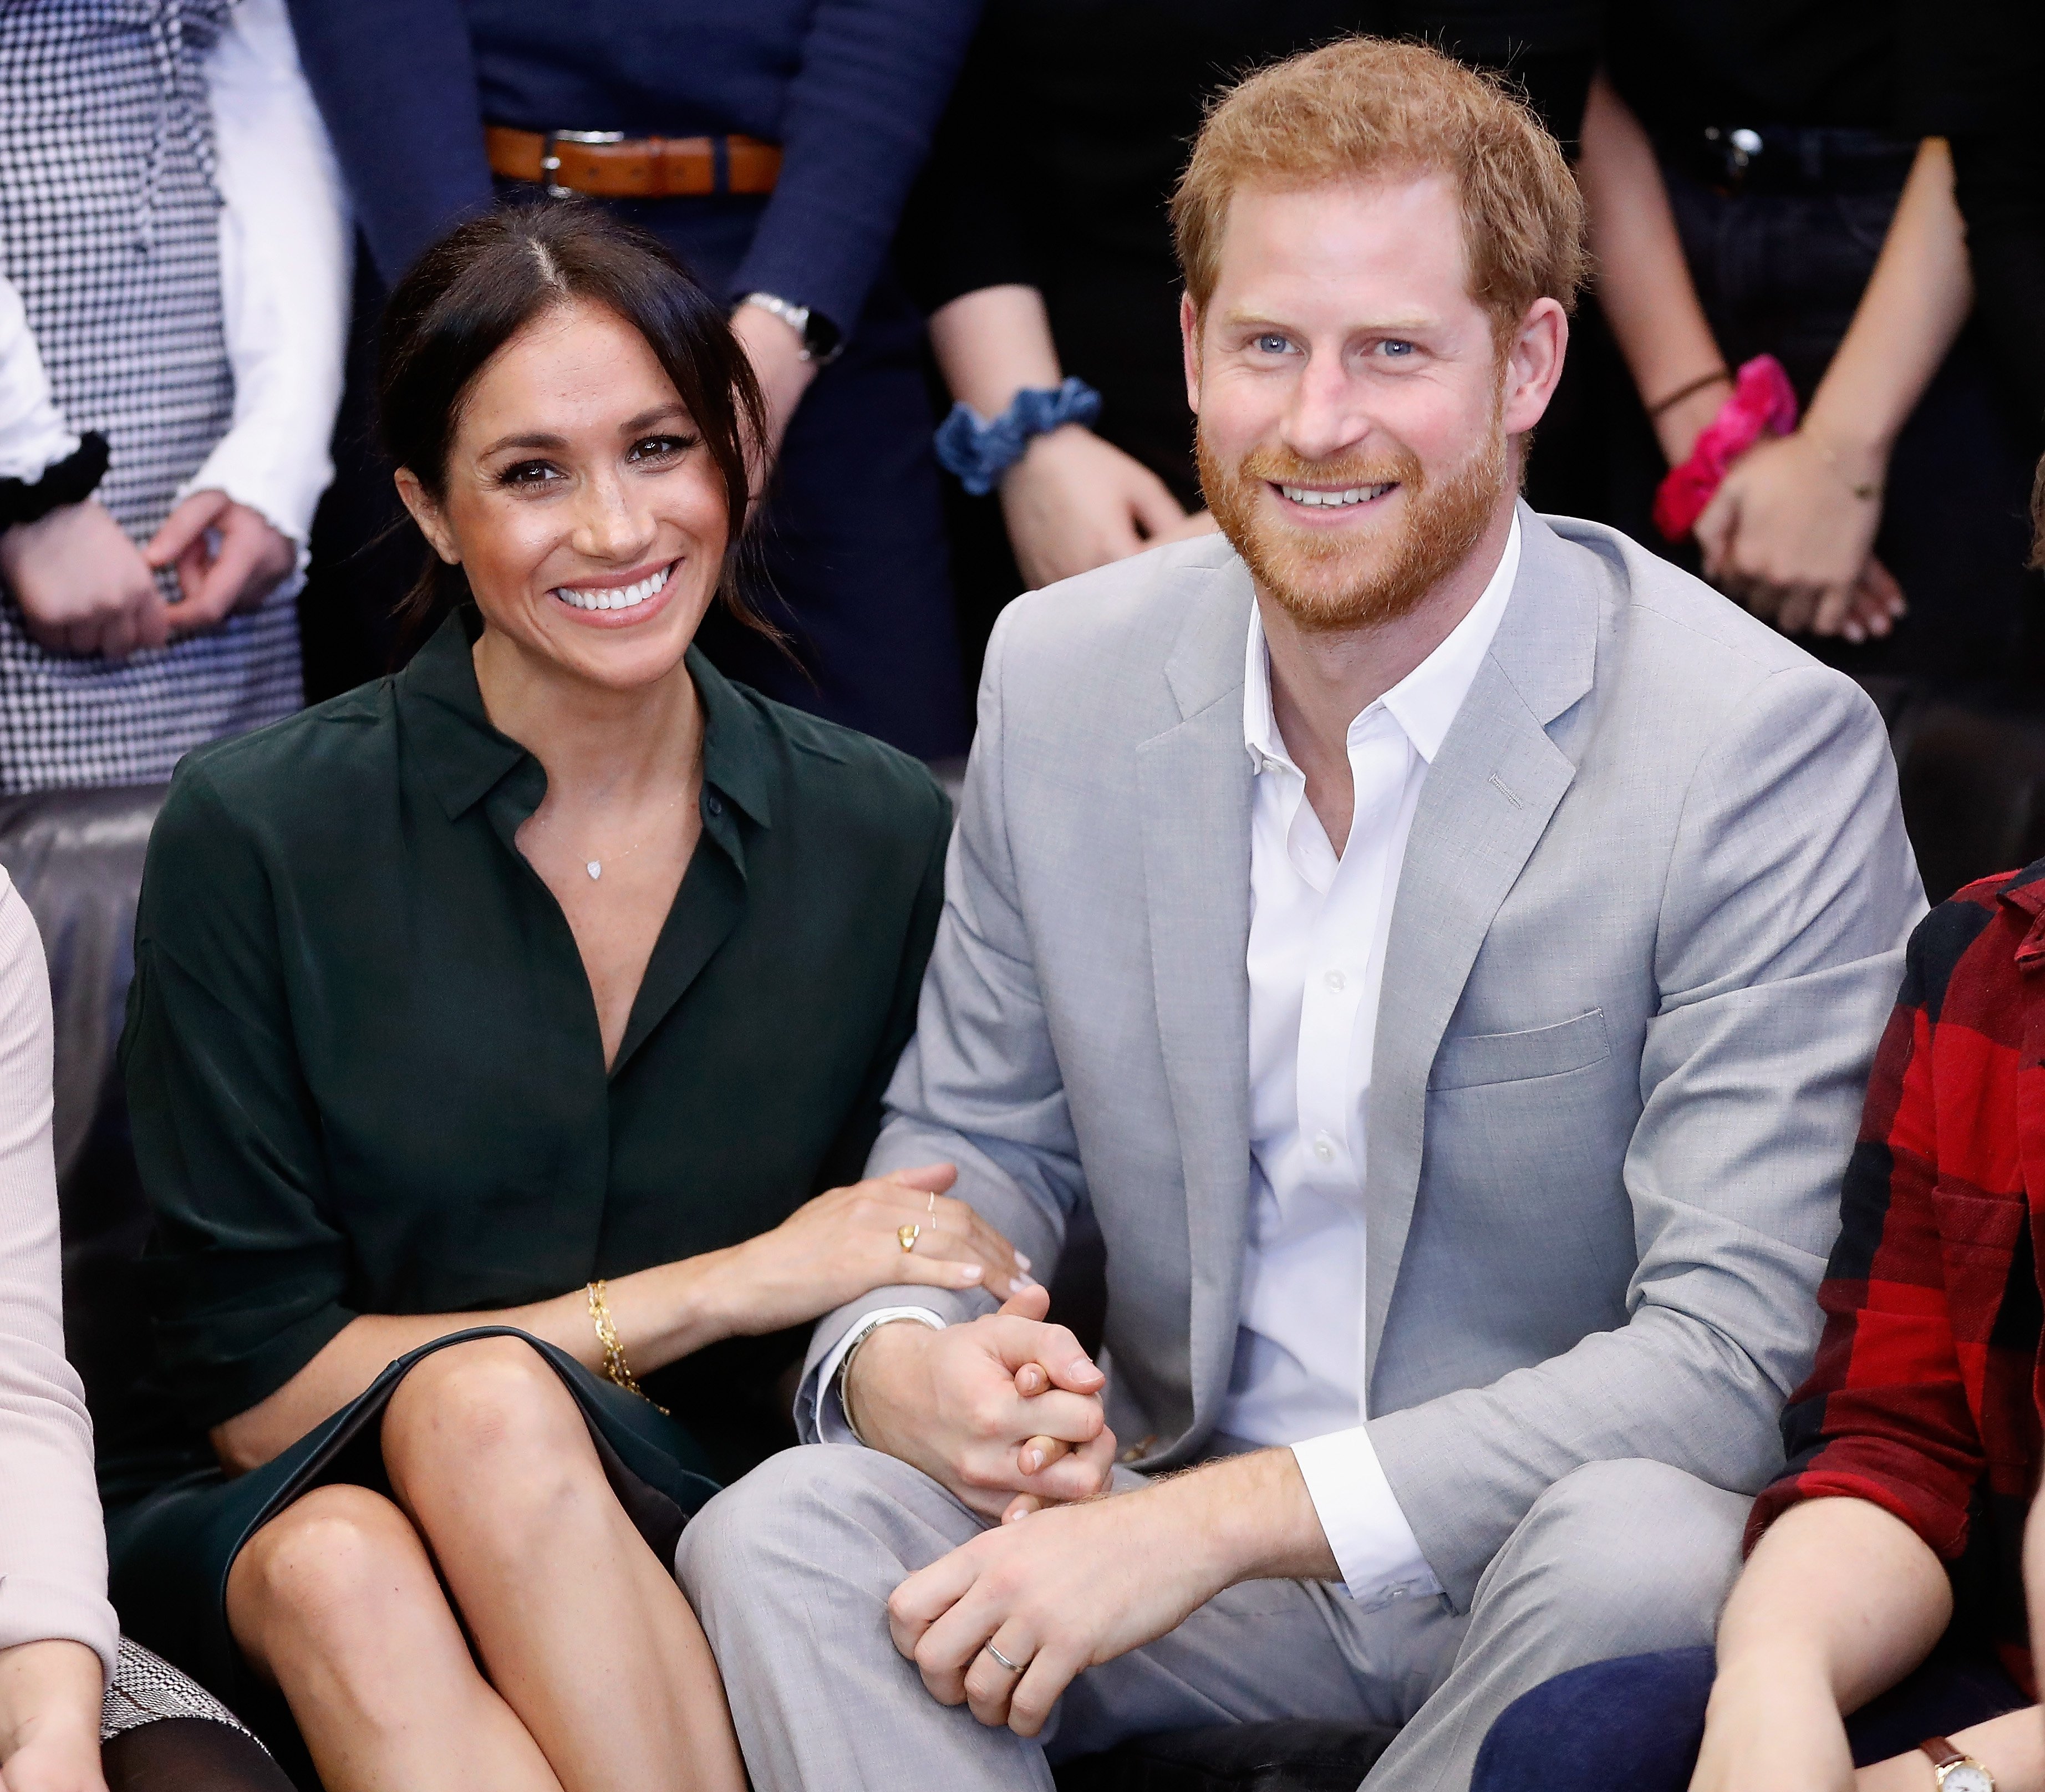 Prince Harry and Meghan Markle during their official visit to the Joff Youth Centre in Peacehaven, Sussex on October 3, 2018, in Peacehaven, United Kingdom. | Source: Getty Images.